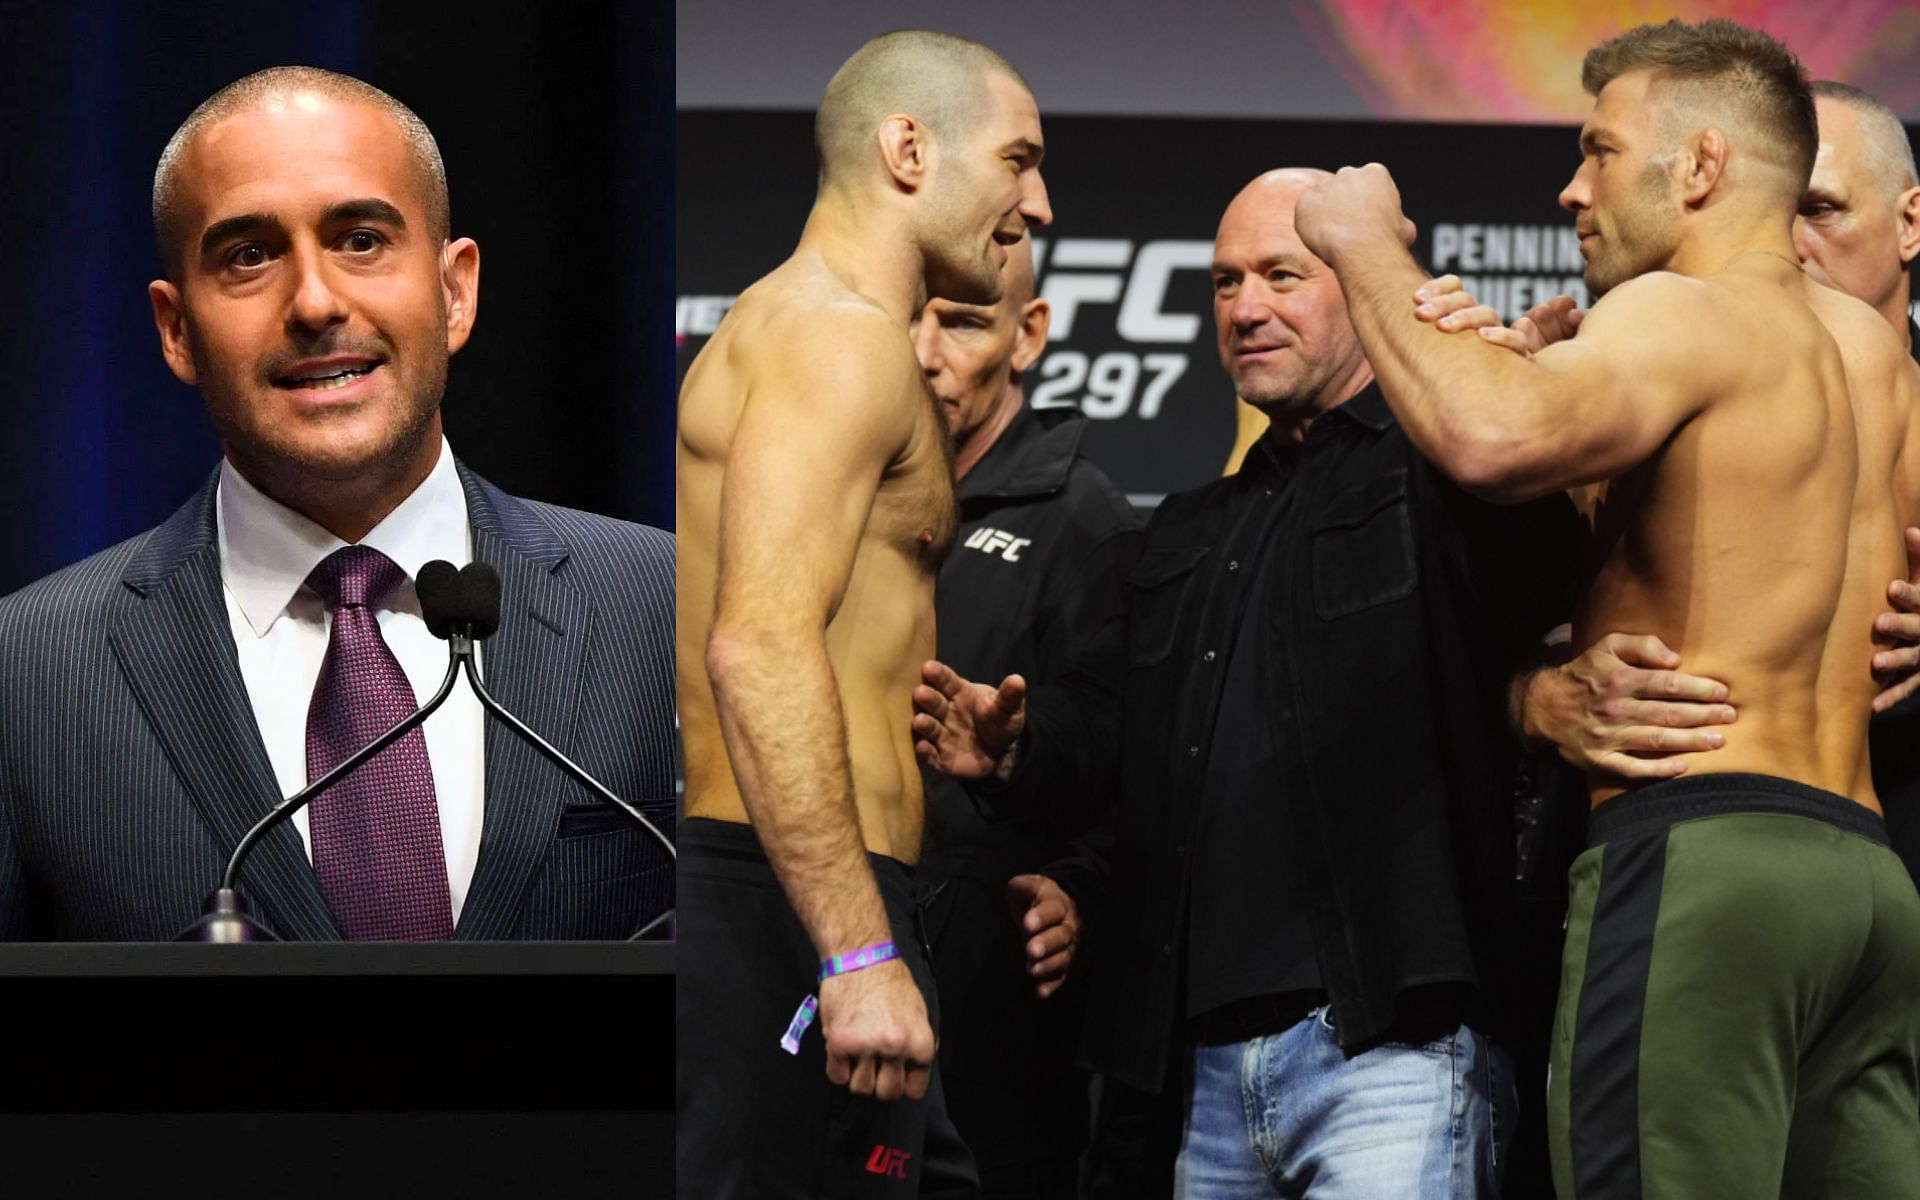 Jon Anik (left) names ideal opponents for Sean Strickland and Dricus du Plessis (right) depending on UFC 297 outcome [Images Courtesy: @GettyImages and @ufc on X]